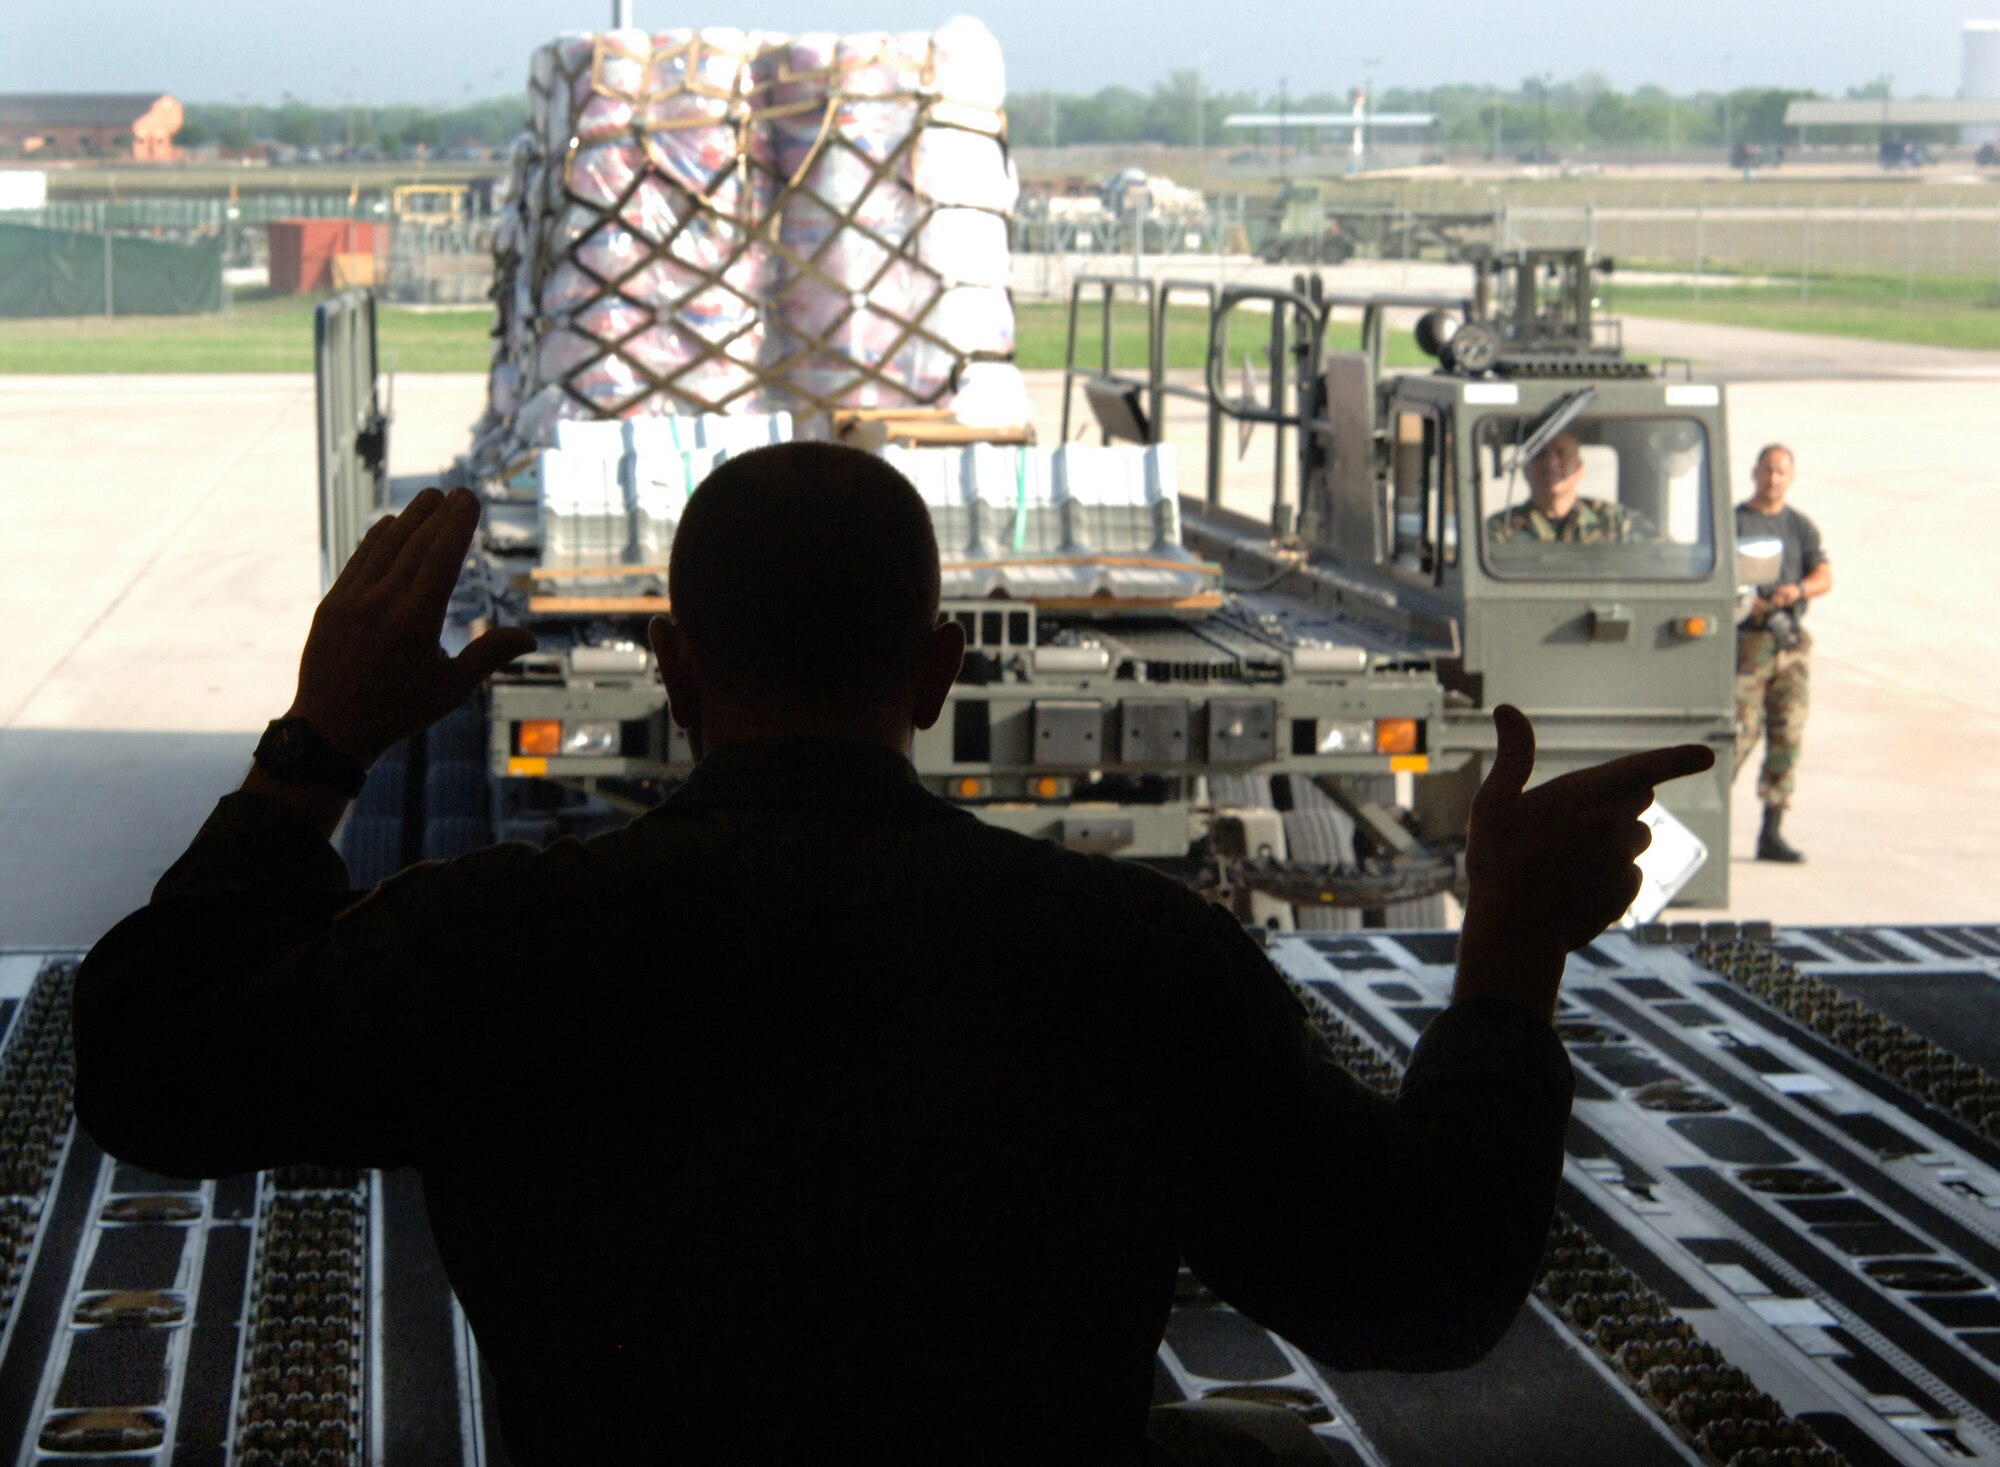 Master Sgt. Shawn Delp signals the driver to line up cargo for loading in preparation for a mission to Saint Lucia Friday, April 7, 2006. The aircrew was delivering construction materials and Reserve civil engineers who are building an operations center and barracks for the police force in support of Saint Lucia's counter-drug operations.  Sergeant Delp is with the 300th Airlift Squadron at Charleston Air Force Base, S.C. (U.S. Air Force photo/Tech. Sgt. Larry A. Simmons)